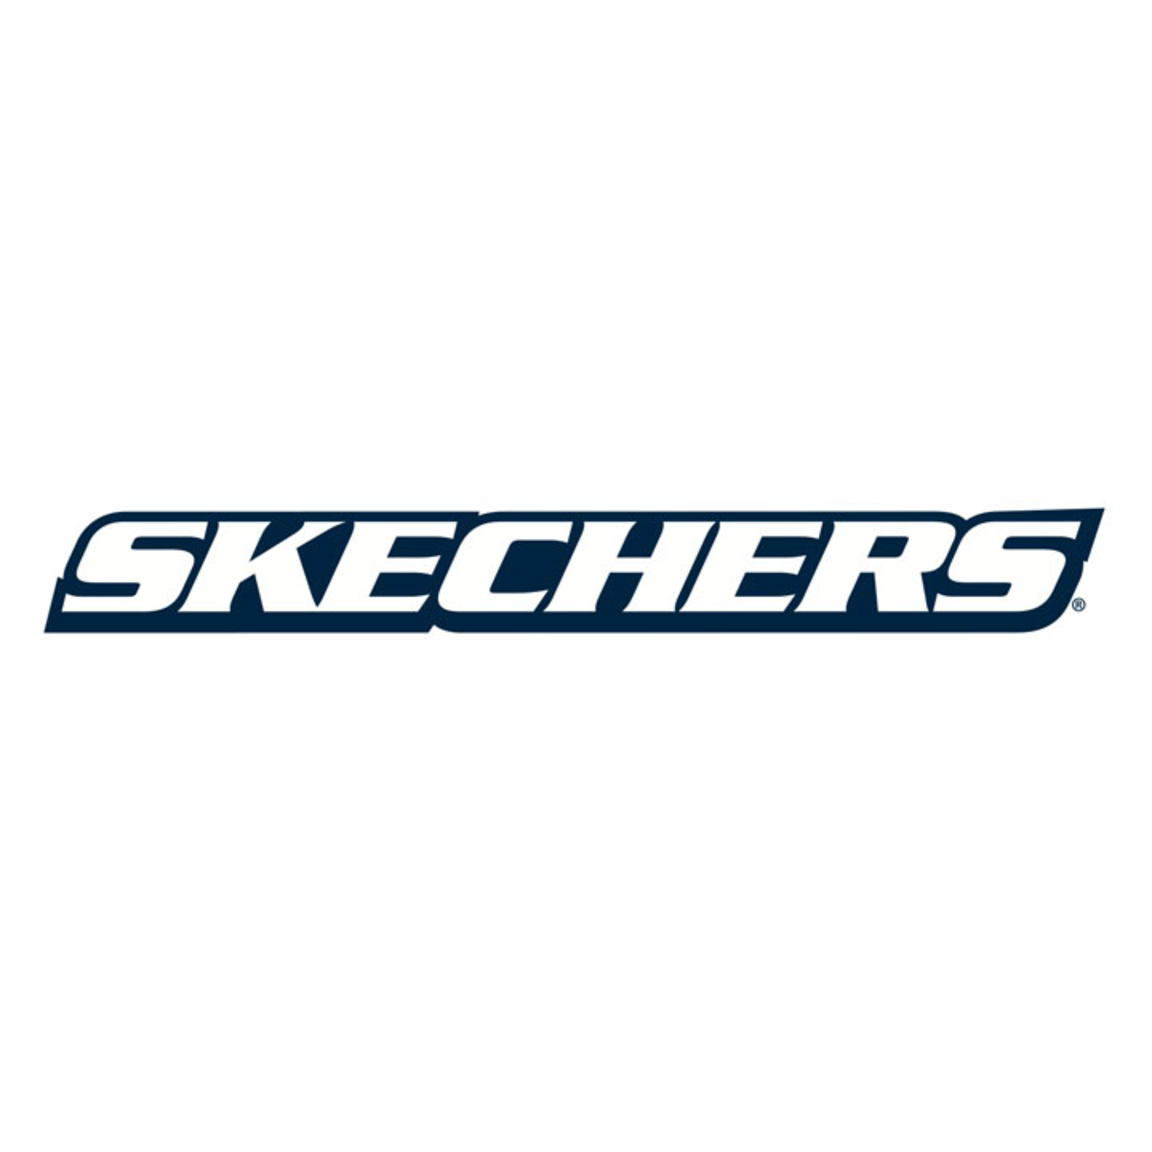 Skechers at Westfield Albany